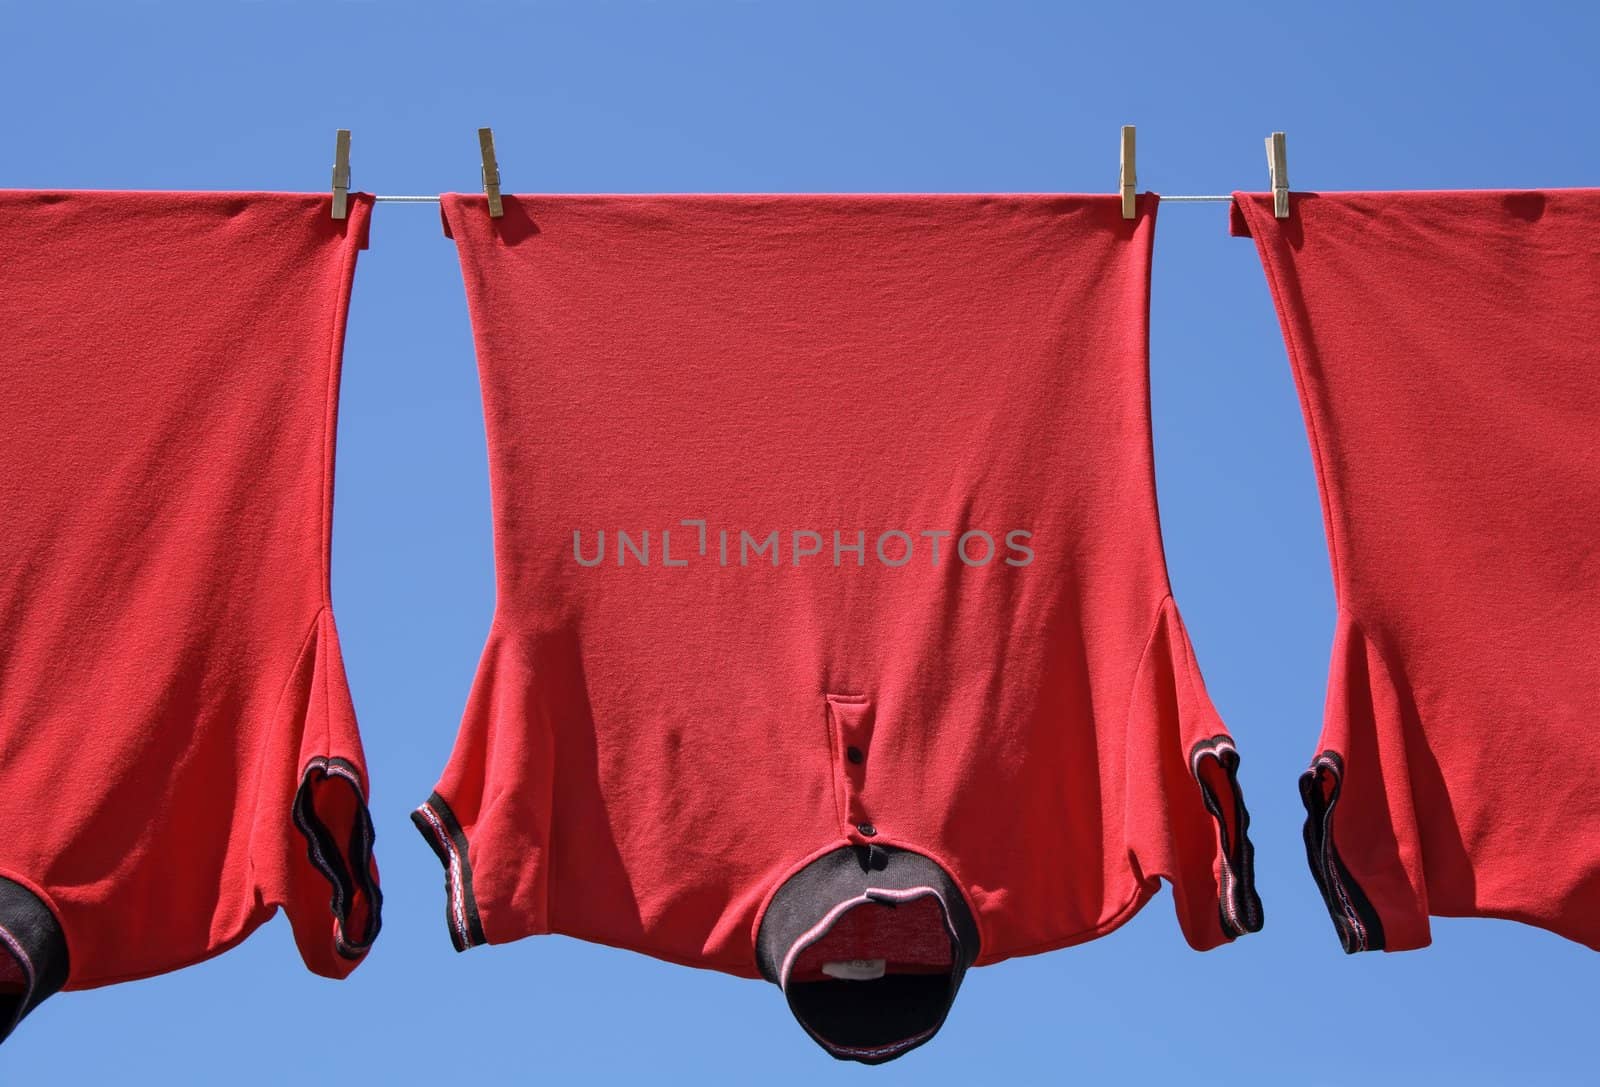 Laundry closeup, three red t-shirts on a clothes-line.